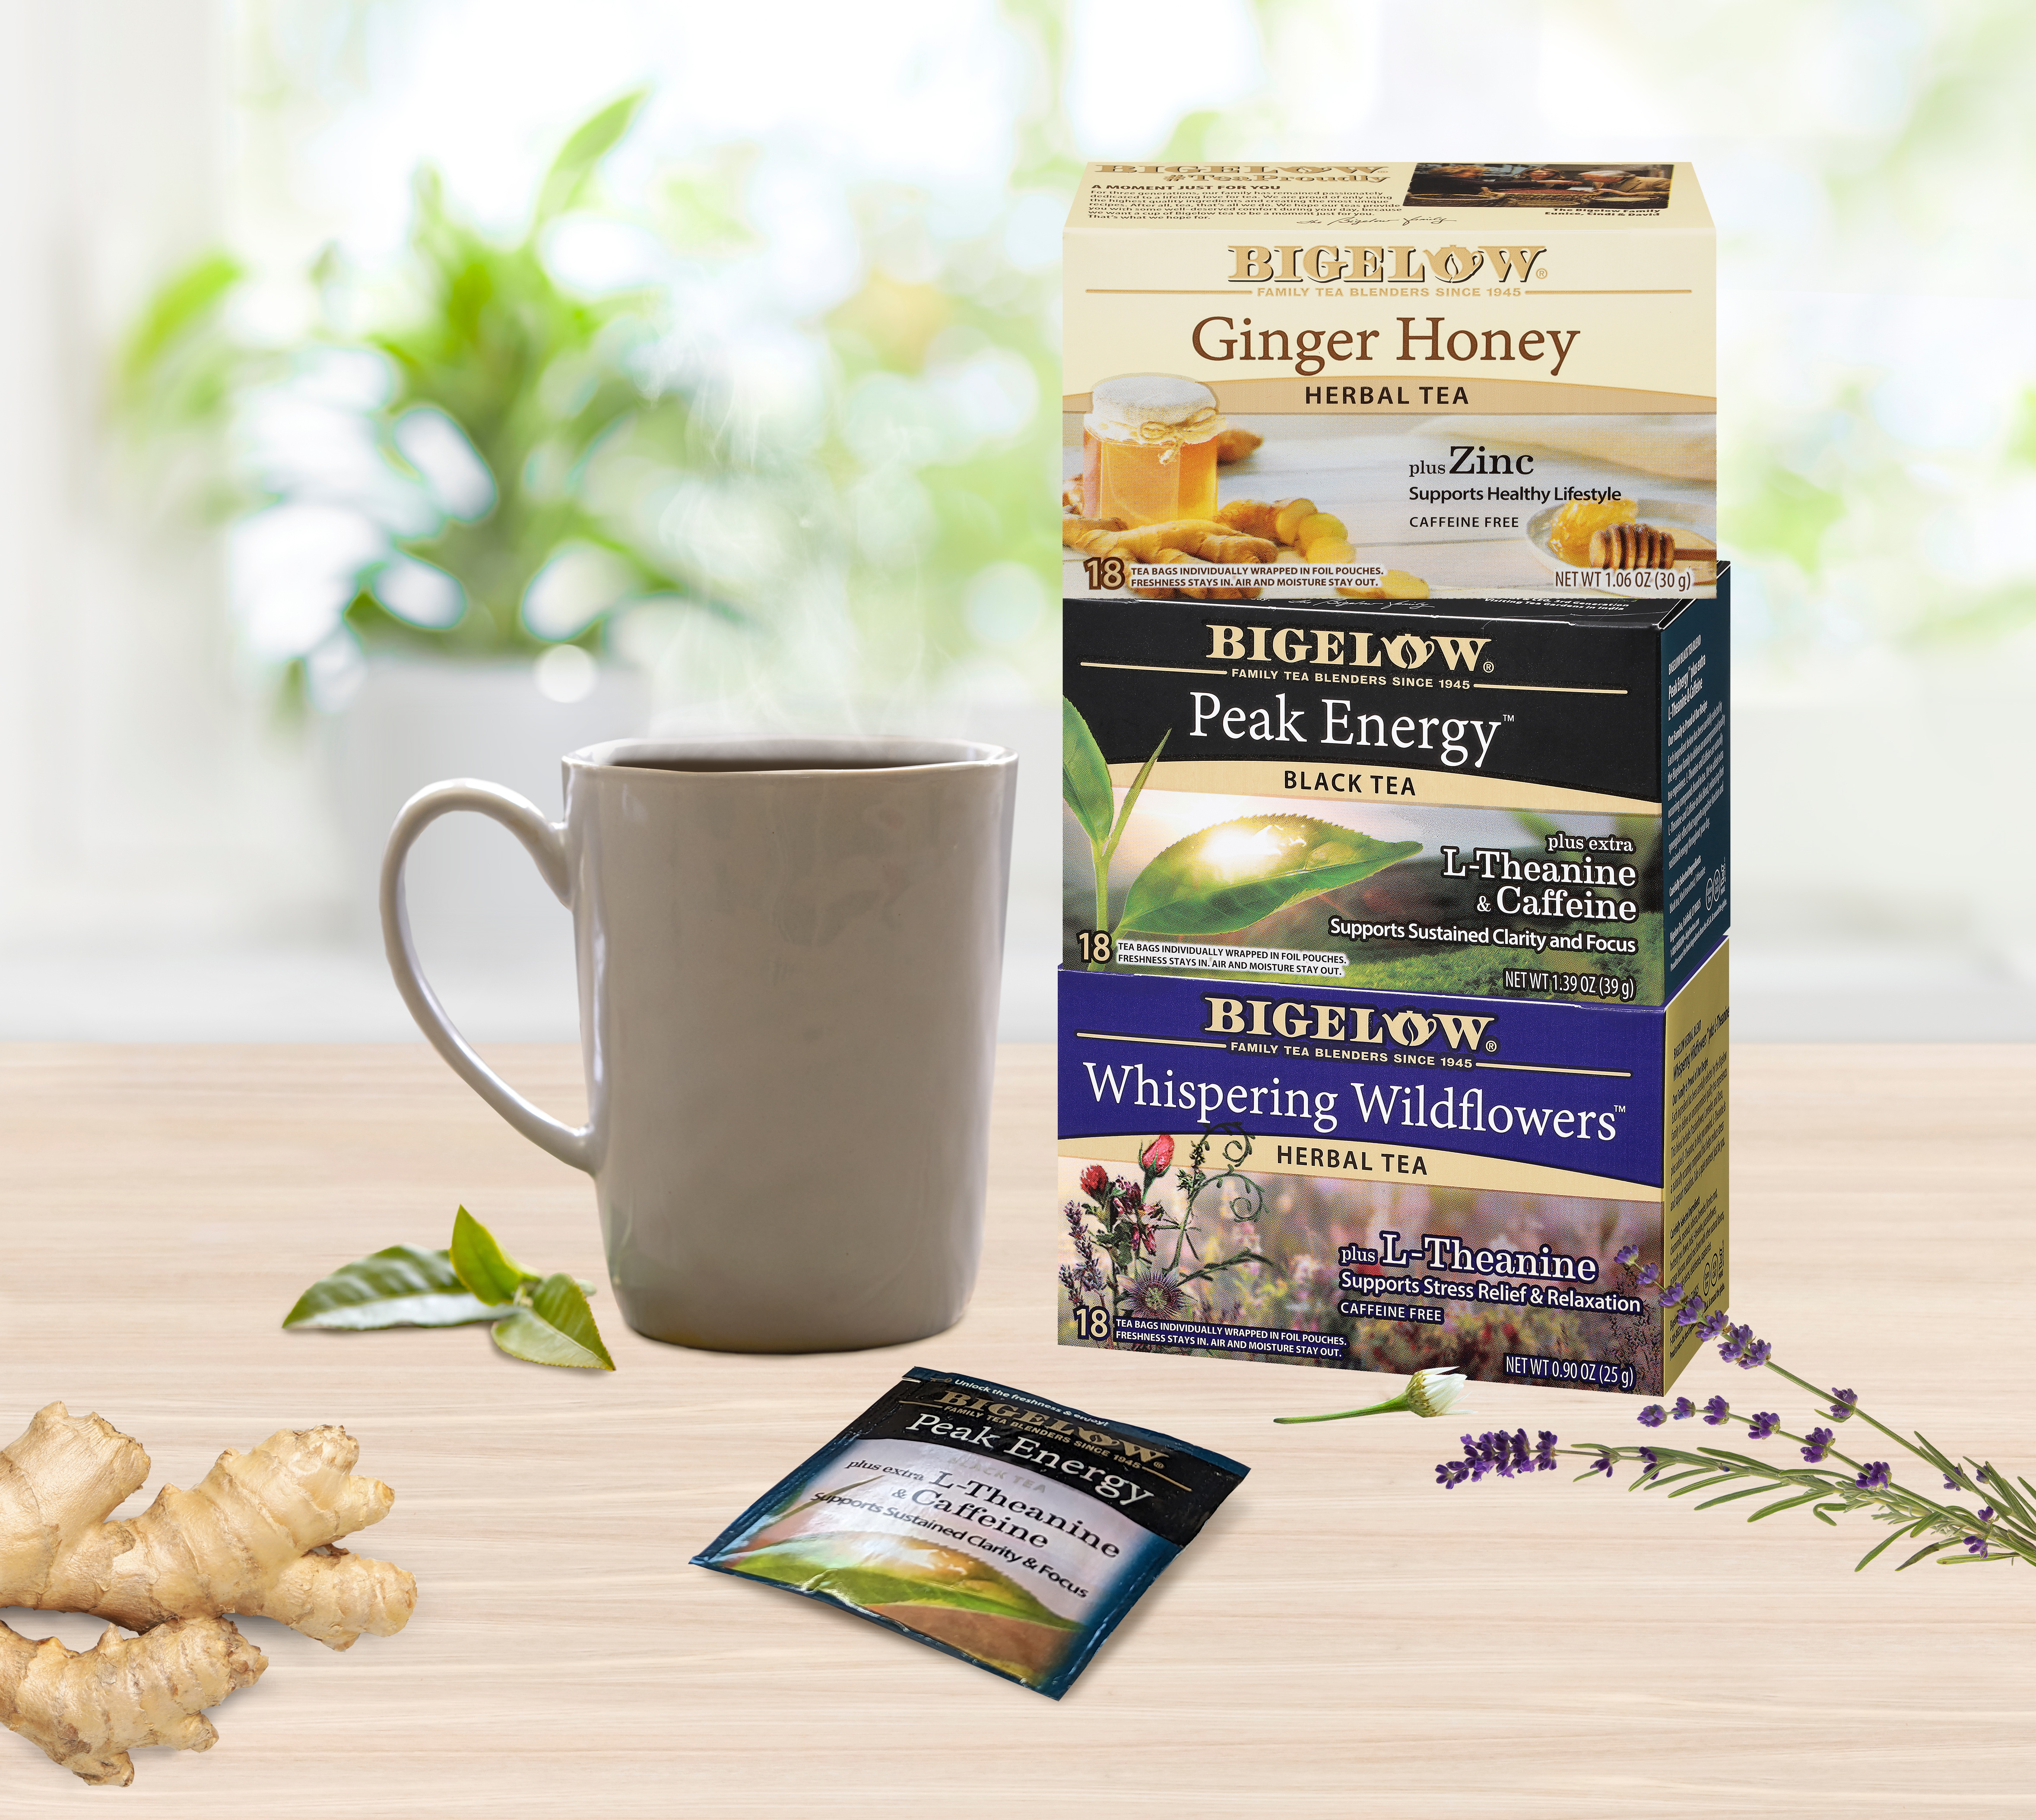 Bigelow Tea Announces NEW Black and Herbal Teas Featuring